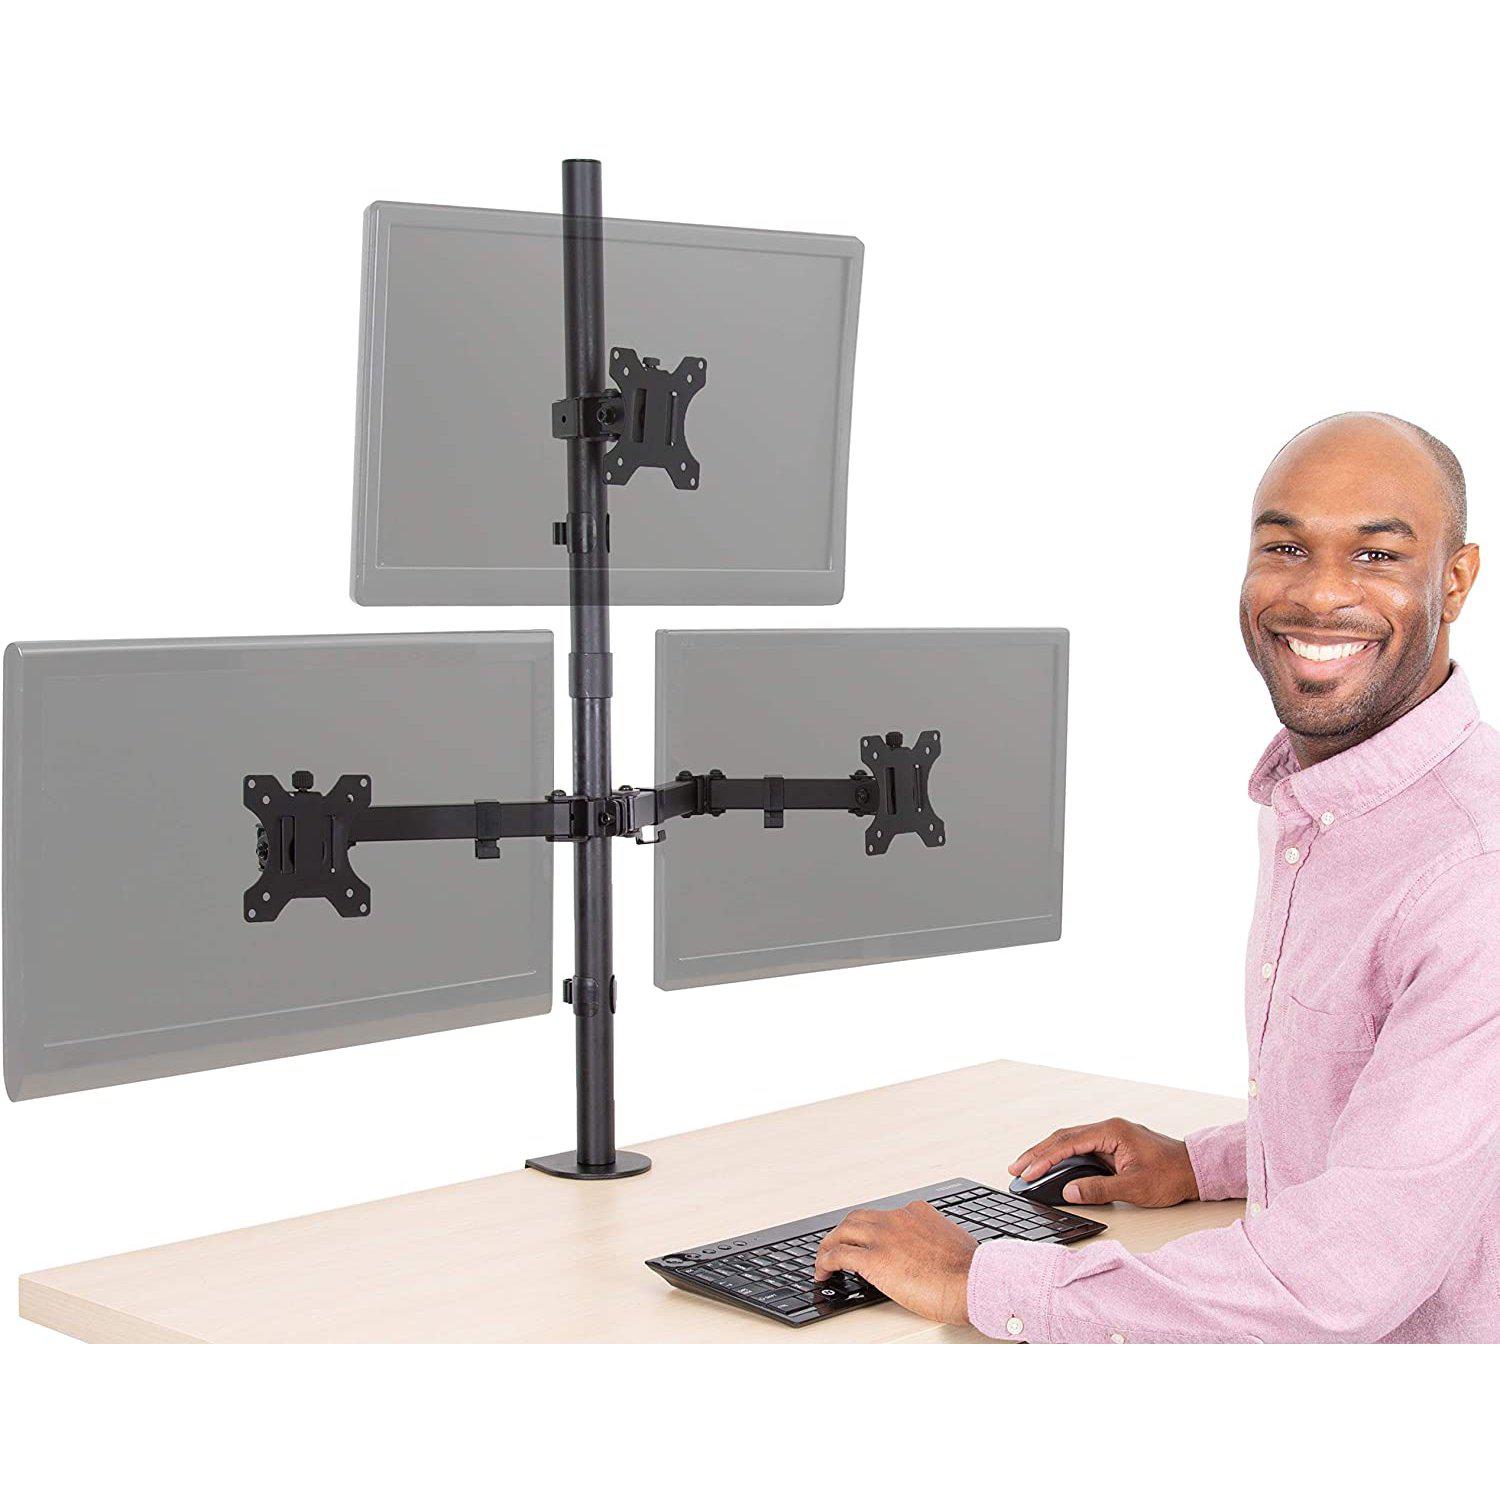 Stand Steady 3 Monitor Mount Desk Stand | Height Adjustable Triple Monitor Stand with Desk Clamp| Full Articulation VESA Mount Fits Most LCD/LED